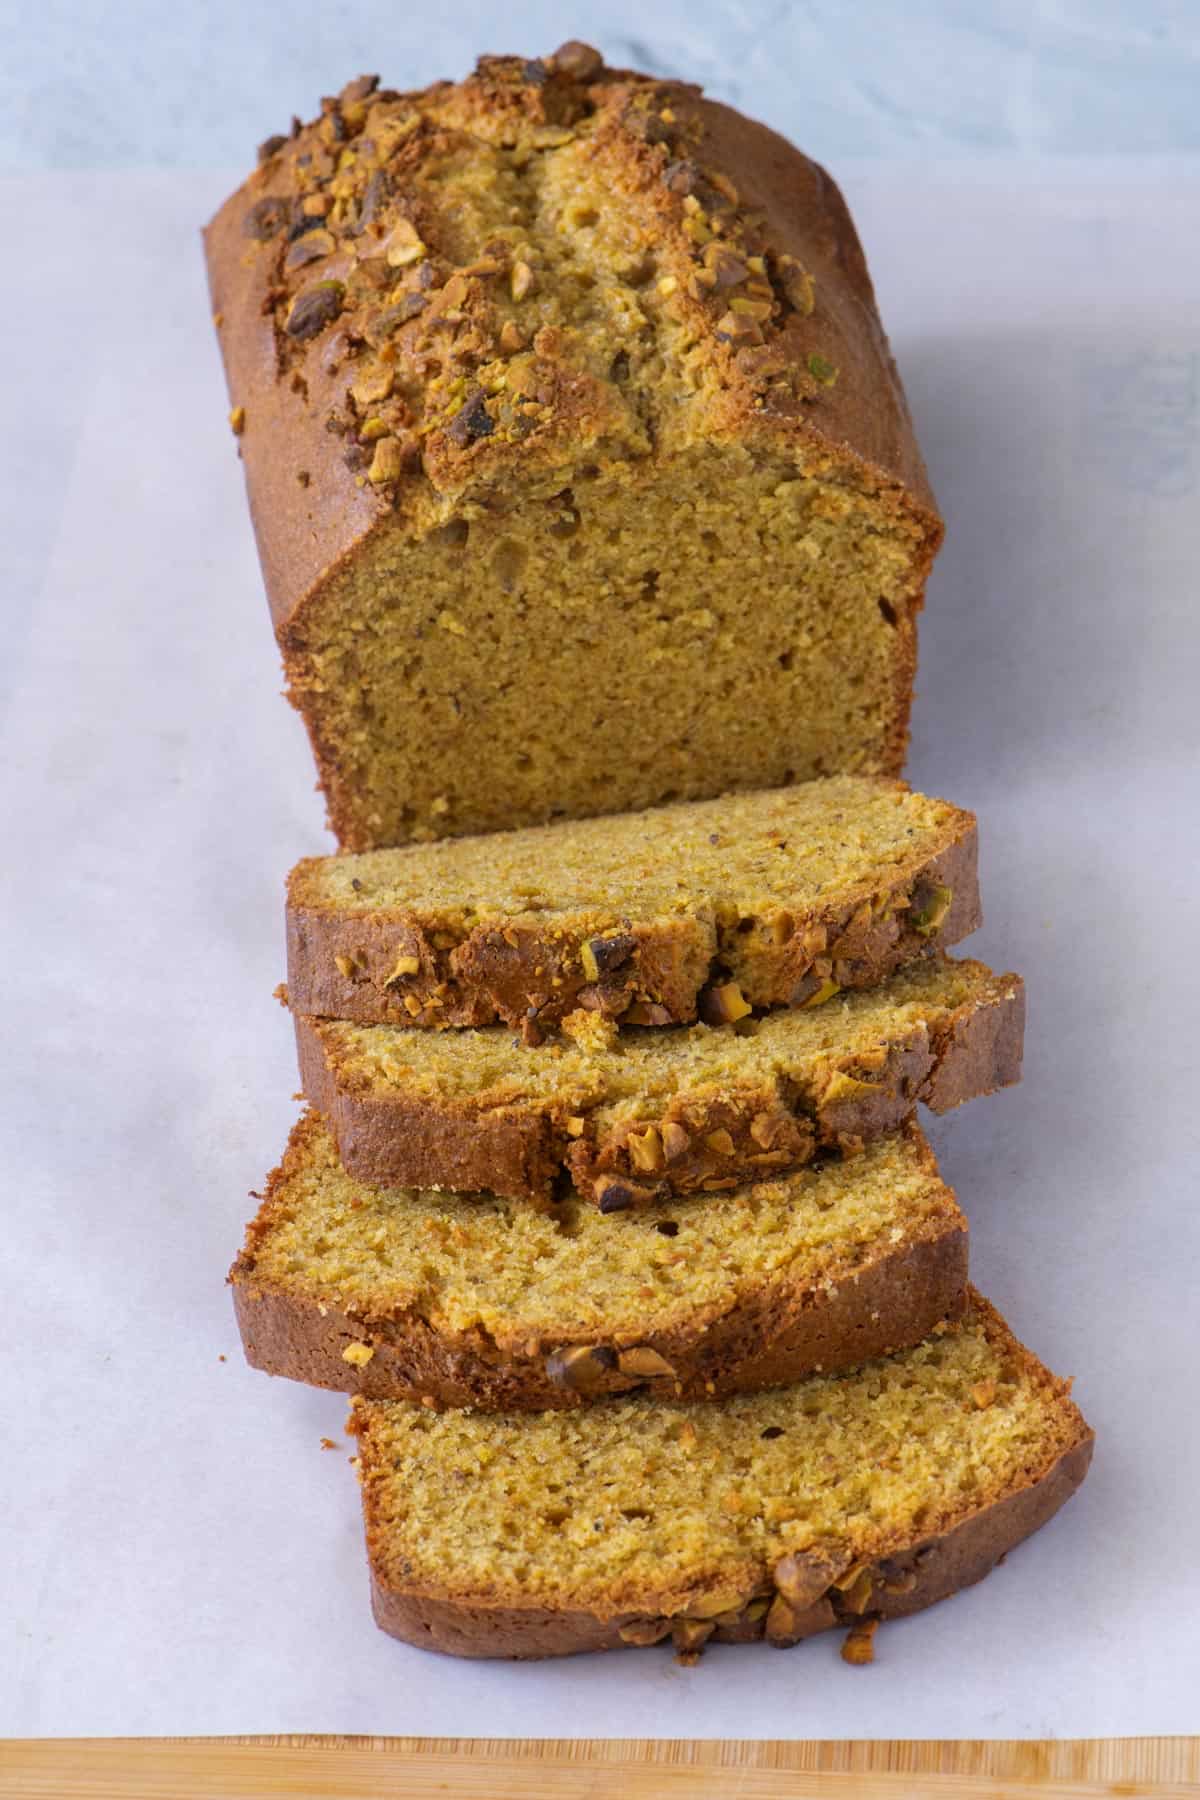 Loaf of sweet bread made with pistachios on a piece of parchment paper with four thick slices cut from half of the loaf.